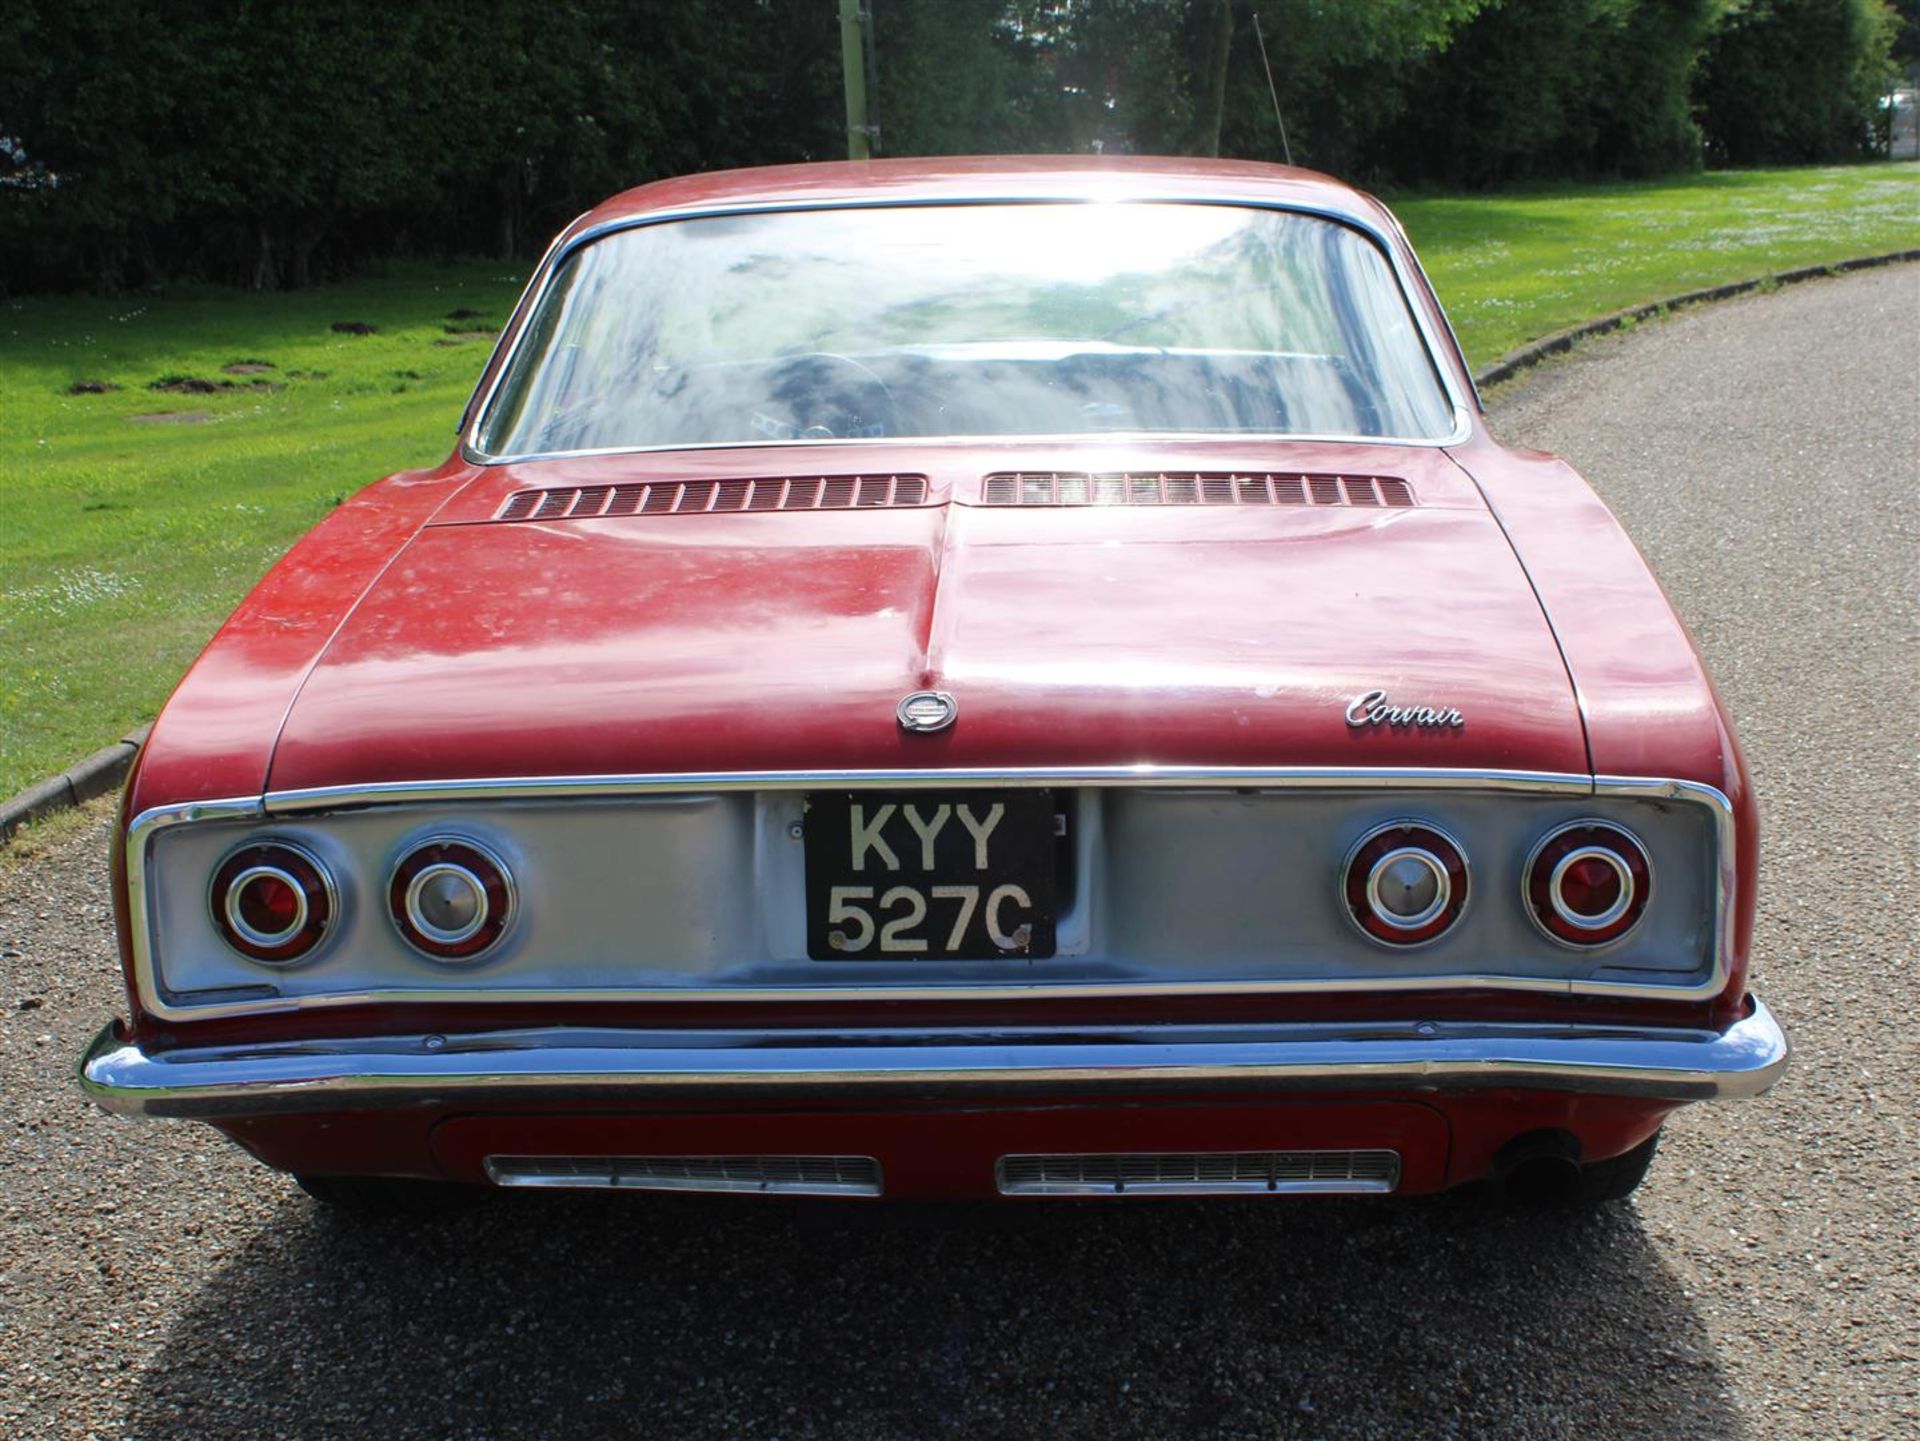 1965 Chevrolet Corvair Corsa Coupe 180HP Turbo LHD - Image 3 of 16